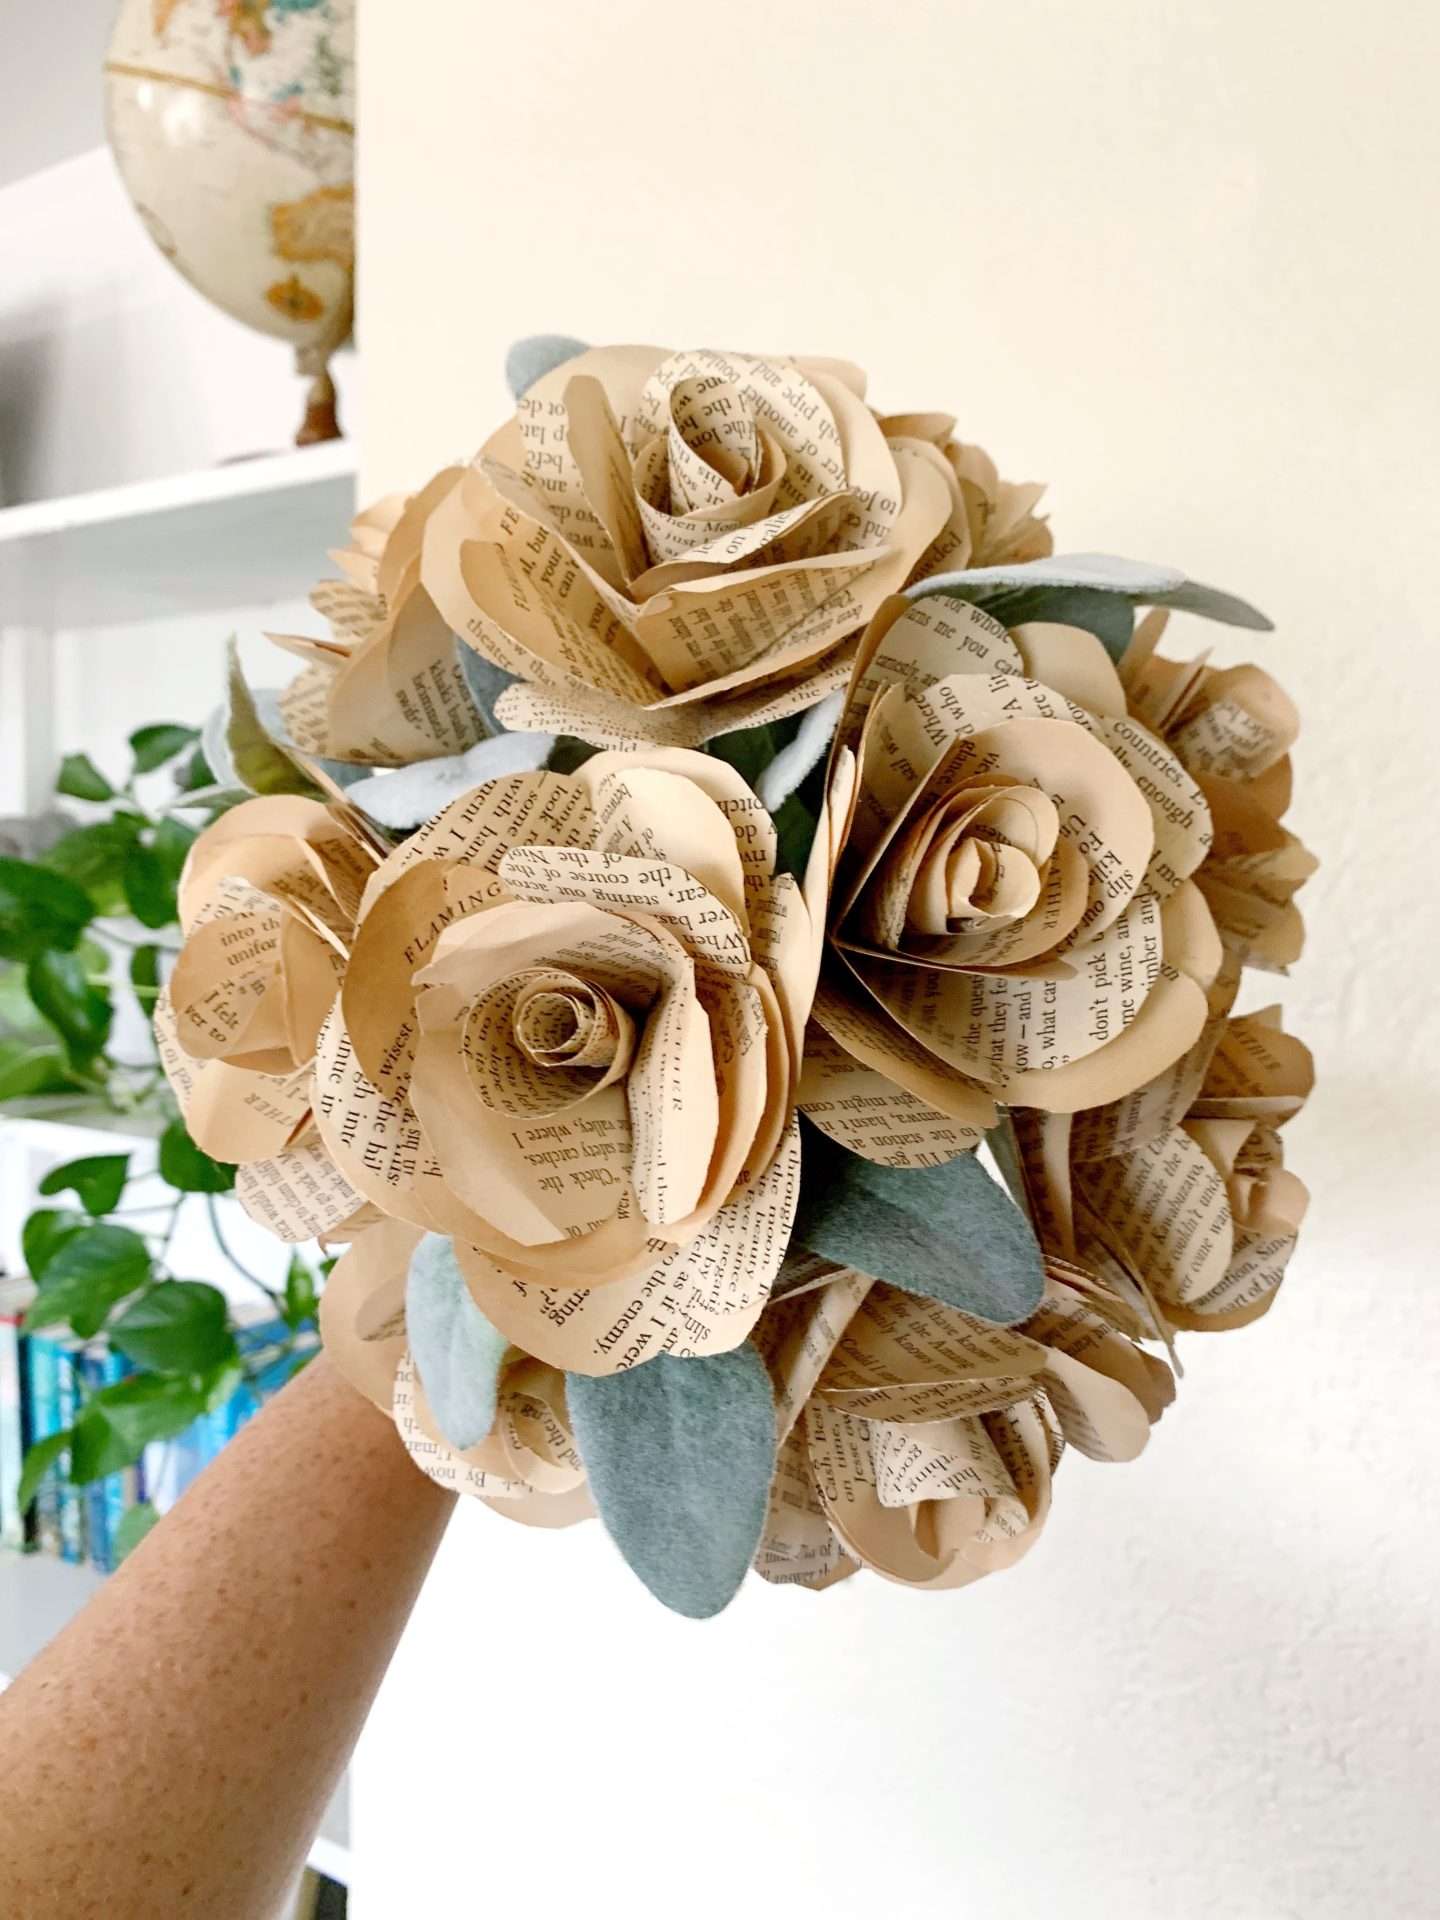 How to make paper flowers from old vintage books.